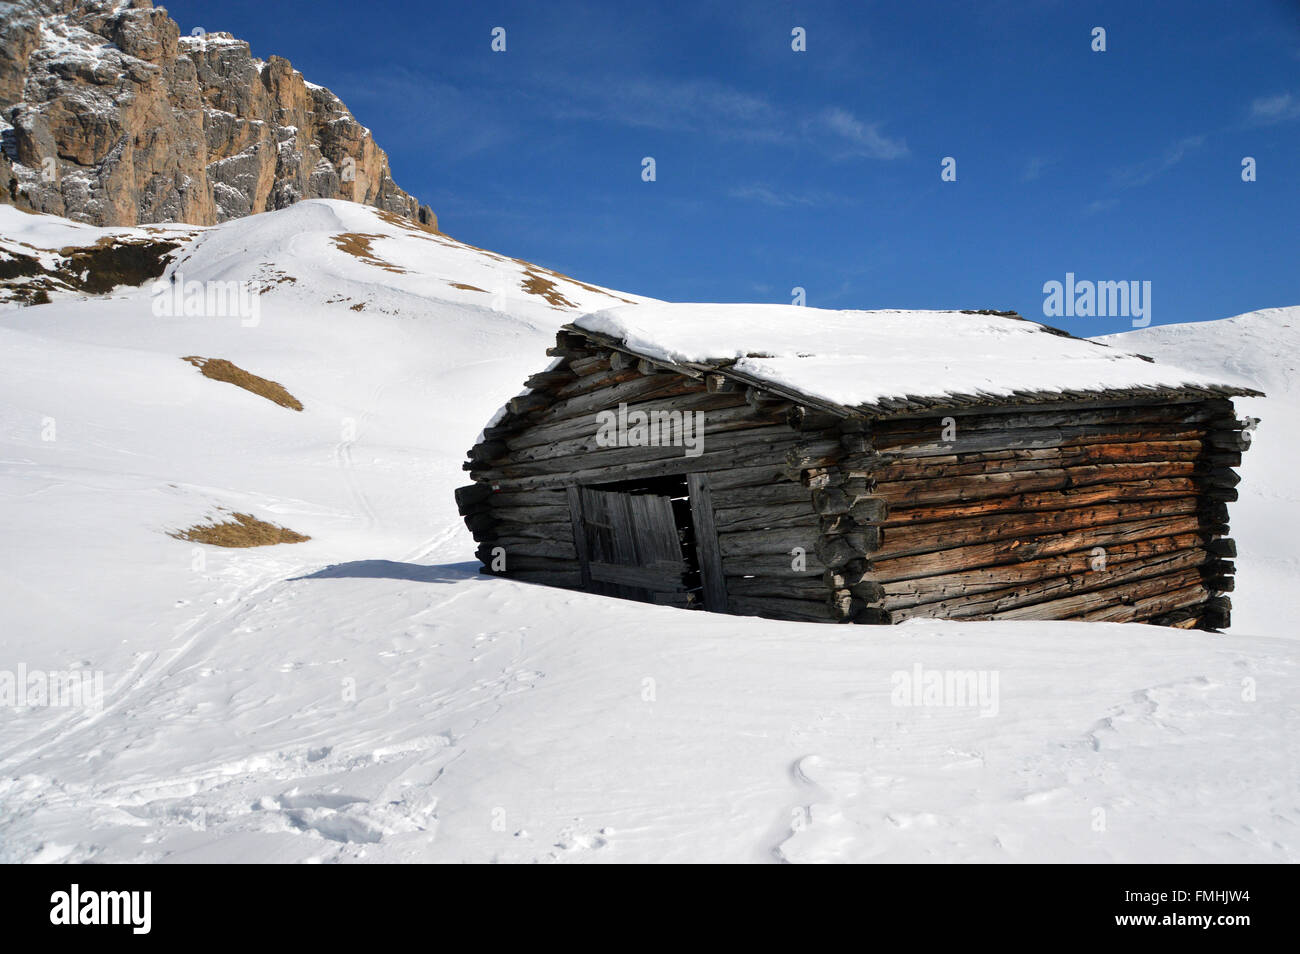 Old Leaning Traditional Alpine Hut in Snow Filled Meadow in Corvara Italian Dolomites Stock Photo